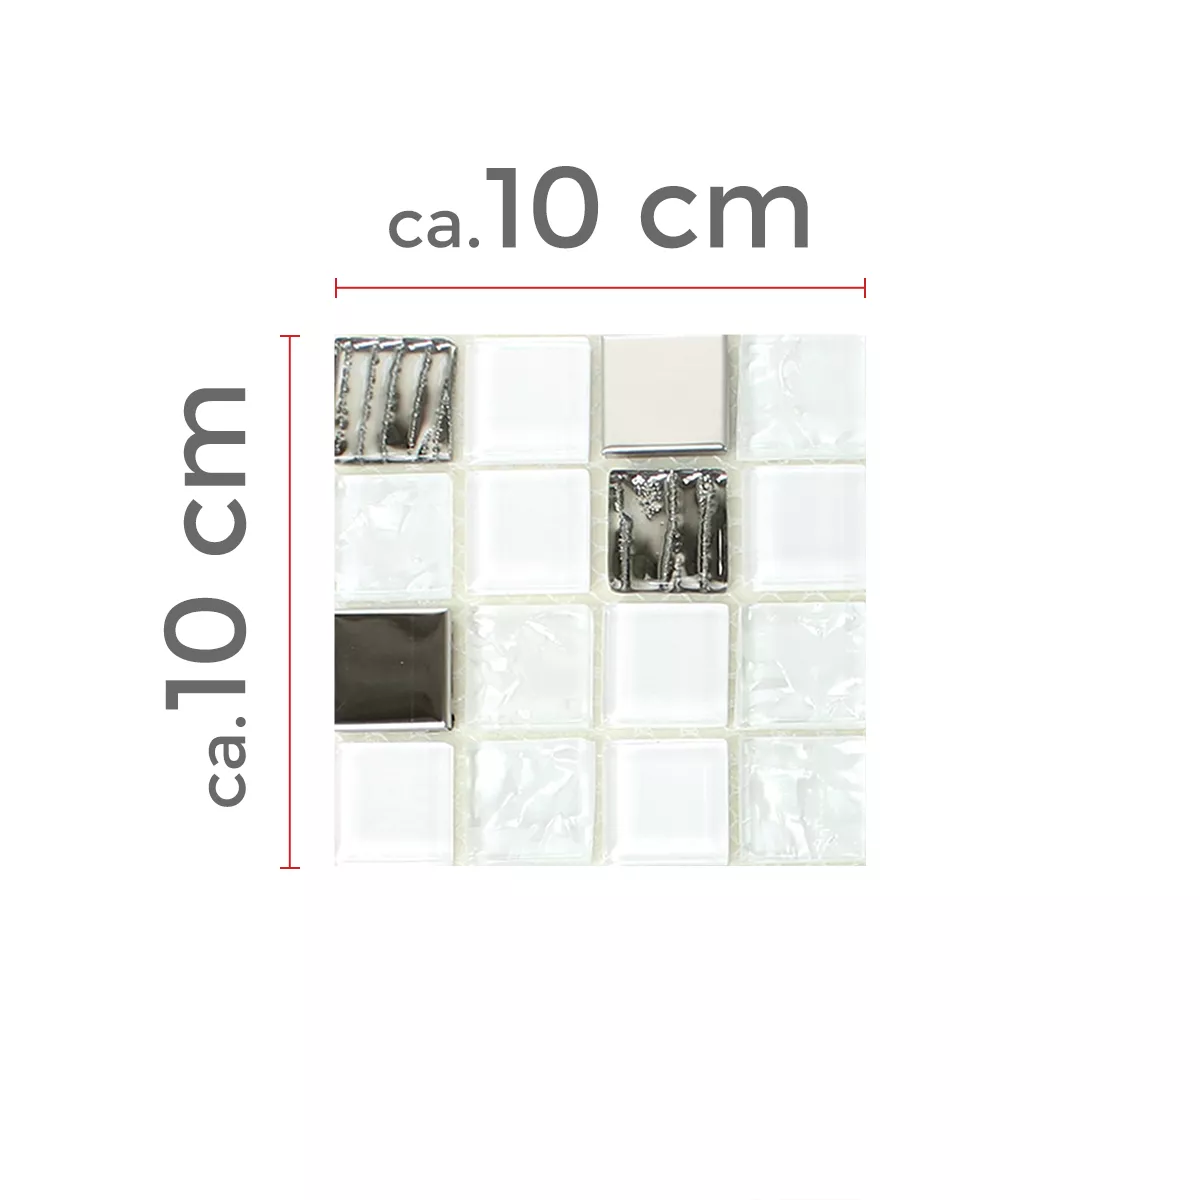 Sample Self Adhesive Glass Stainless Steel Mosaic White Silver